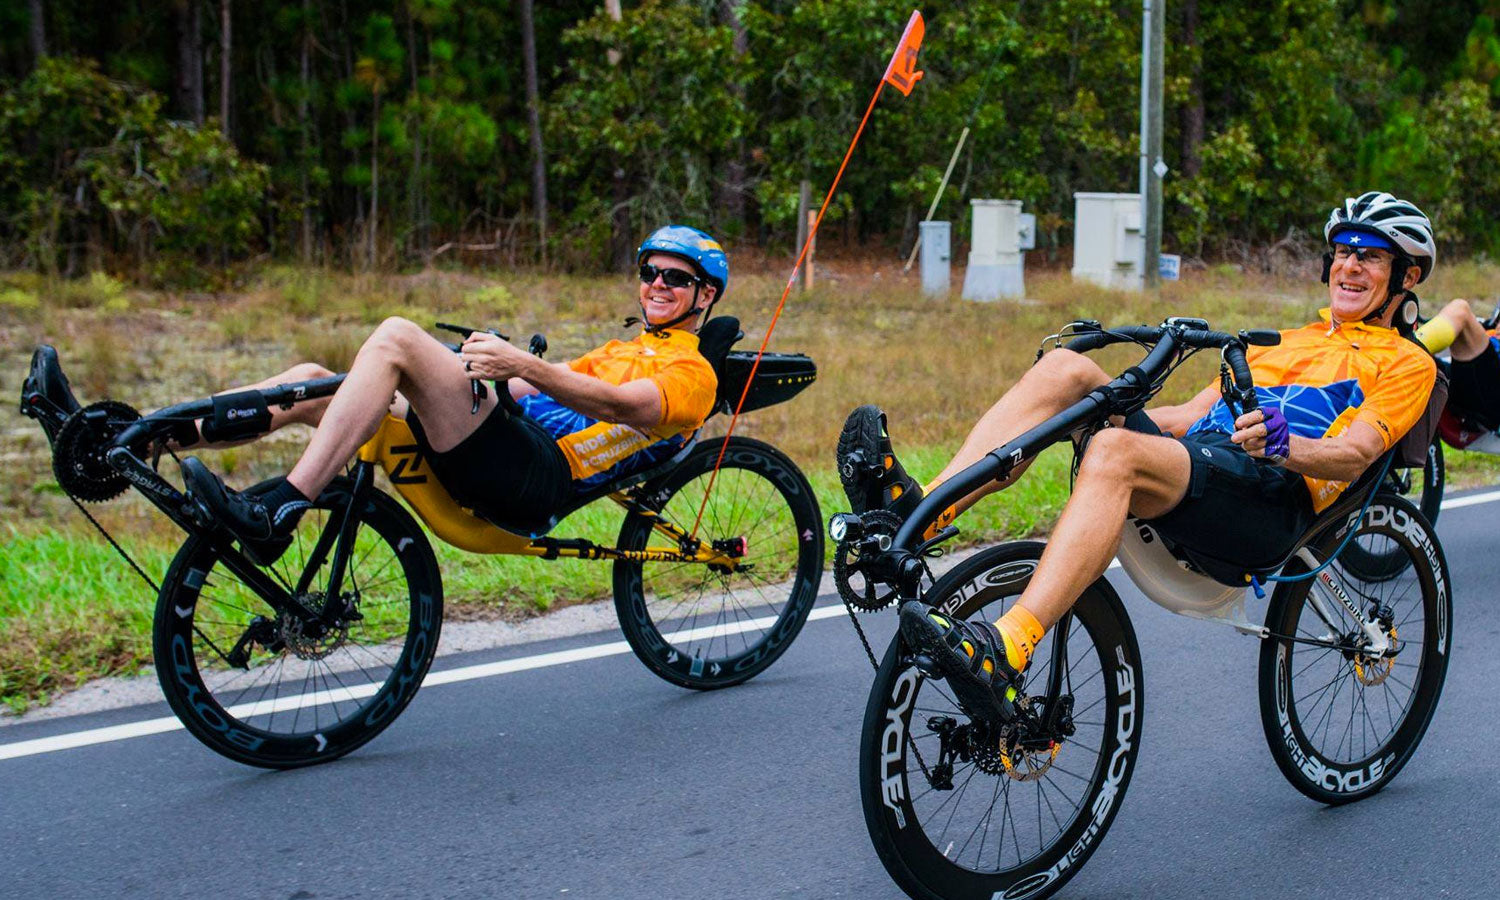 How to increase your visibility while riding a recumbent road bike